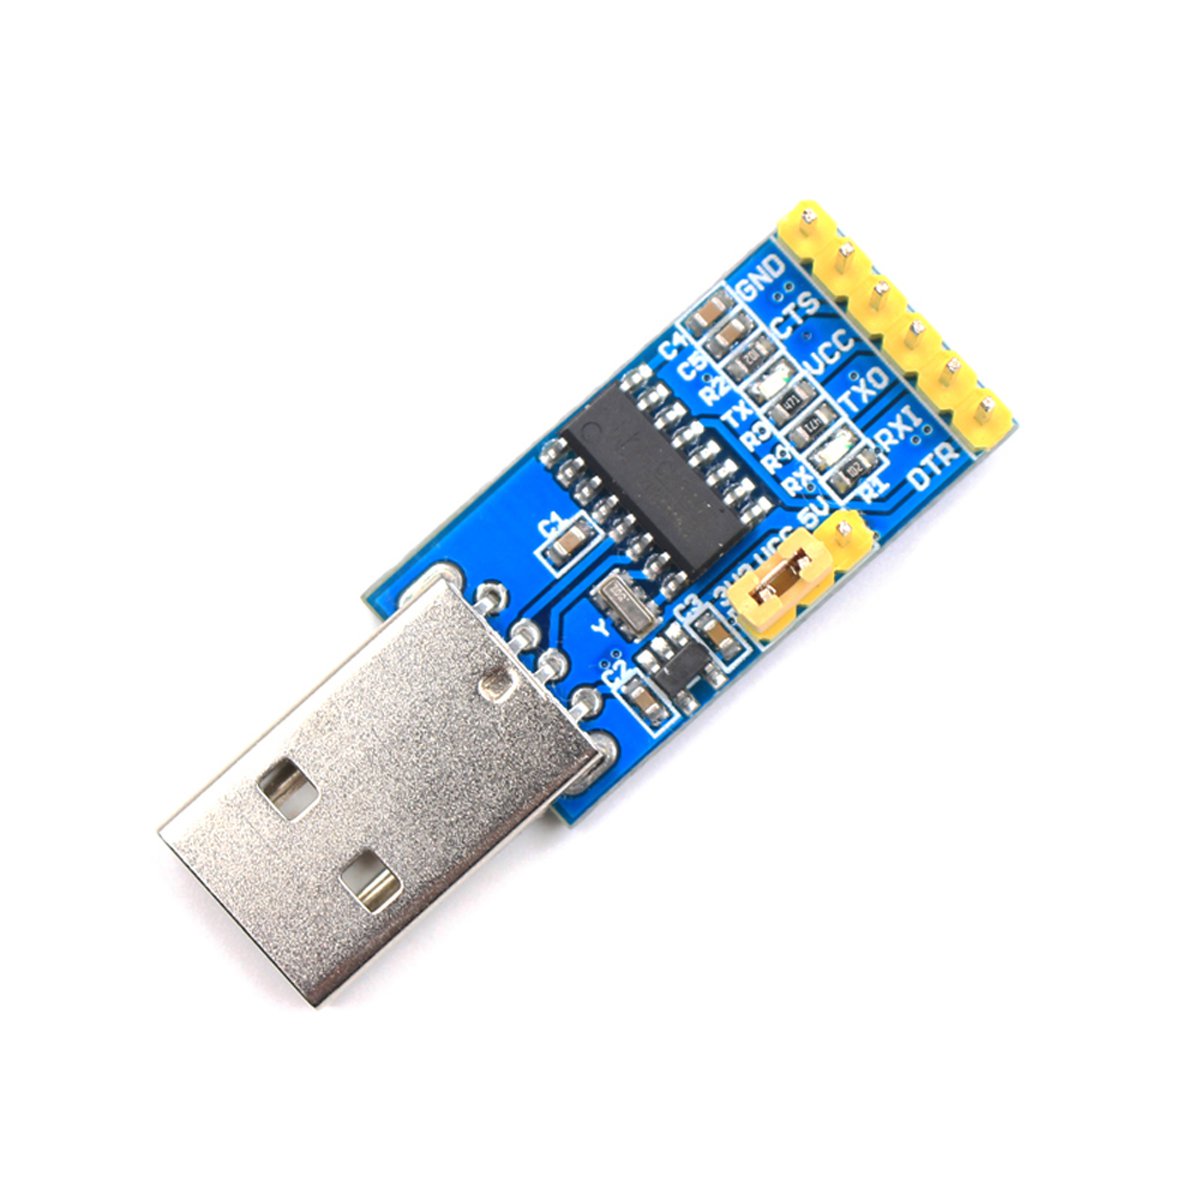 CH340G to Adapter Arduino Pro Mini from on Tindie